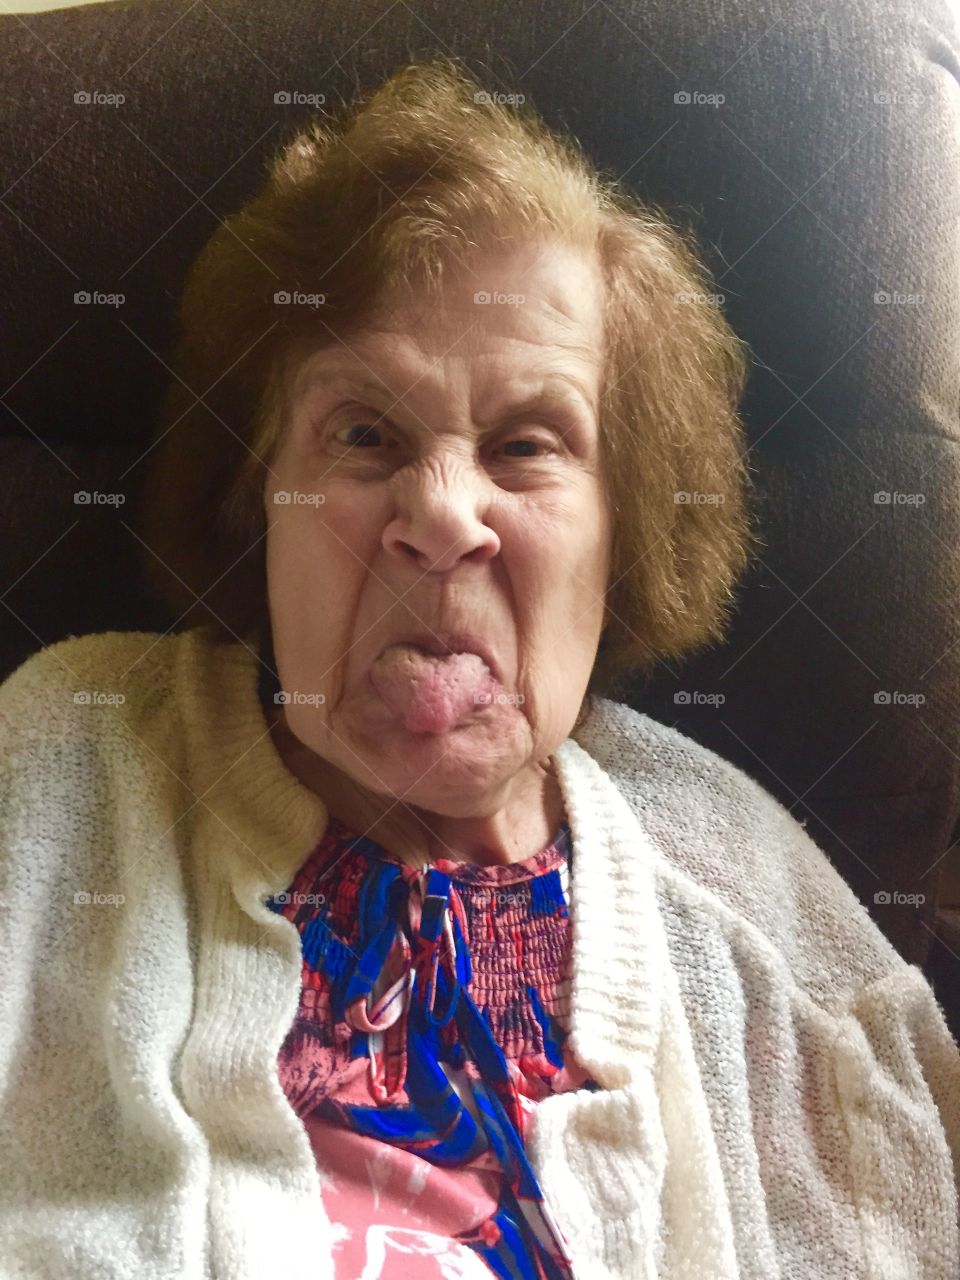 Silly grandma . Tongue out 